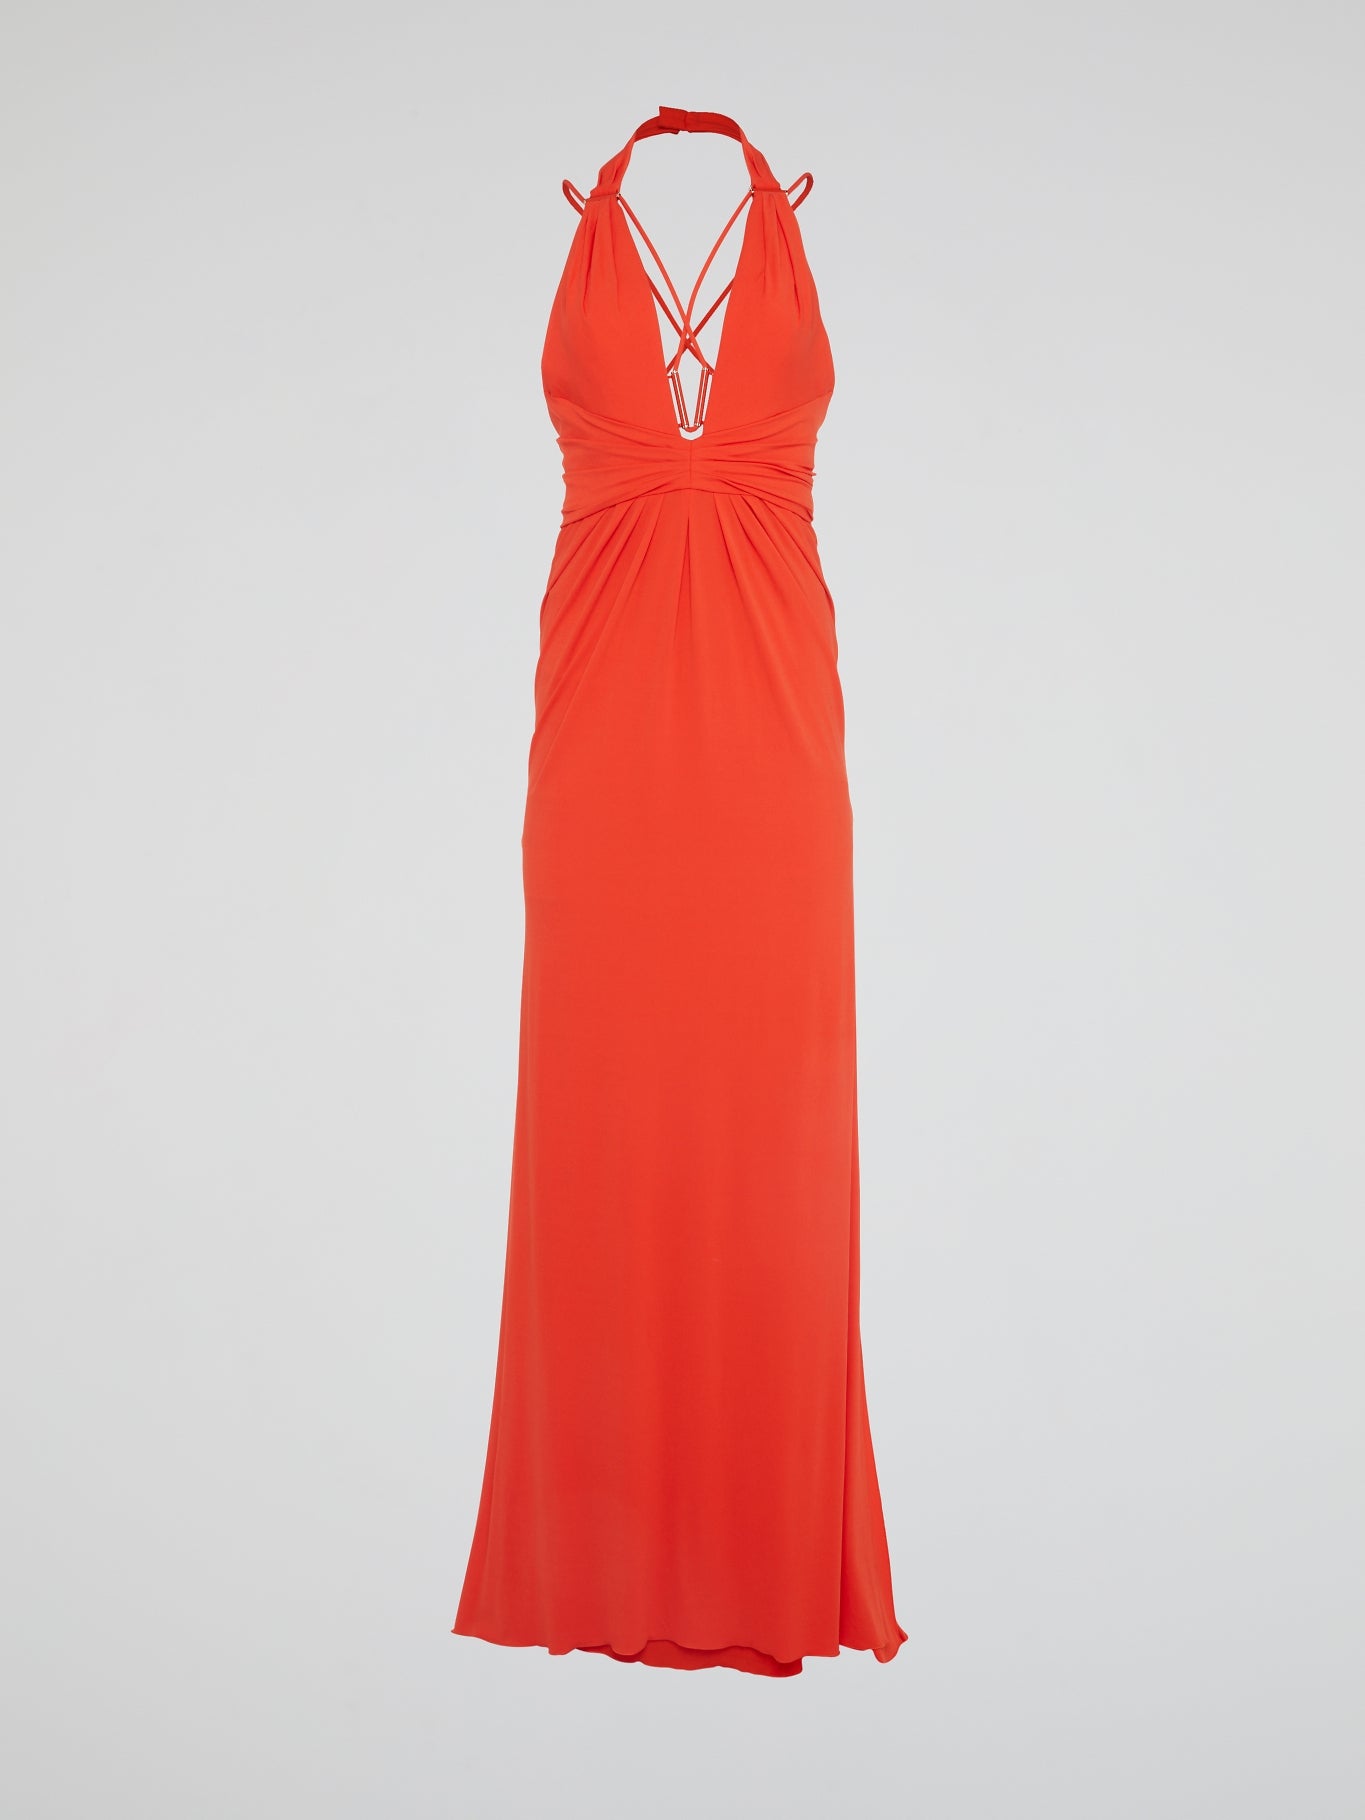 Feel like a bohemian goddess in our stunning red halter neck maxi dress by Roberto Cavalli. This show-stopping piece features intricate detailing and a flowing silhouette that will turn heads wherever you go. Embrace your inner confidence and make a statement in this unforgettable dress that exudes luxury and sophistication.